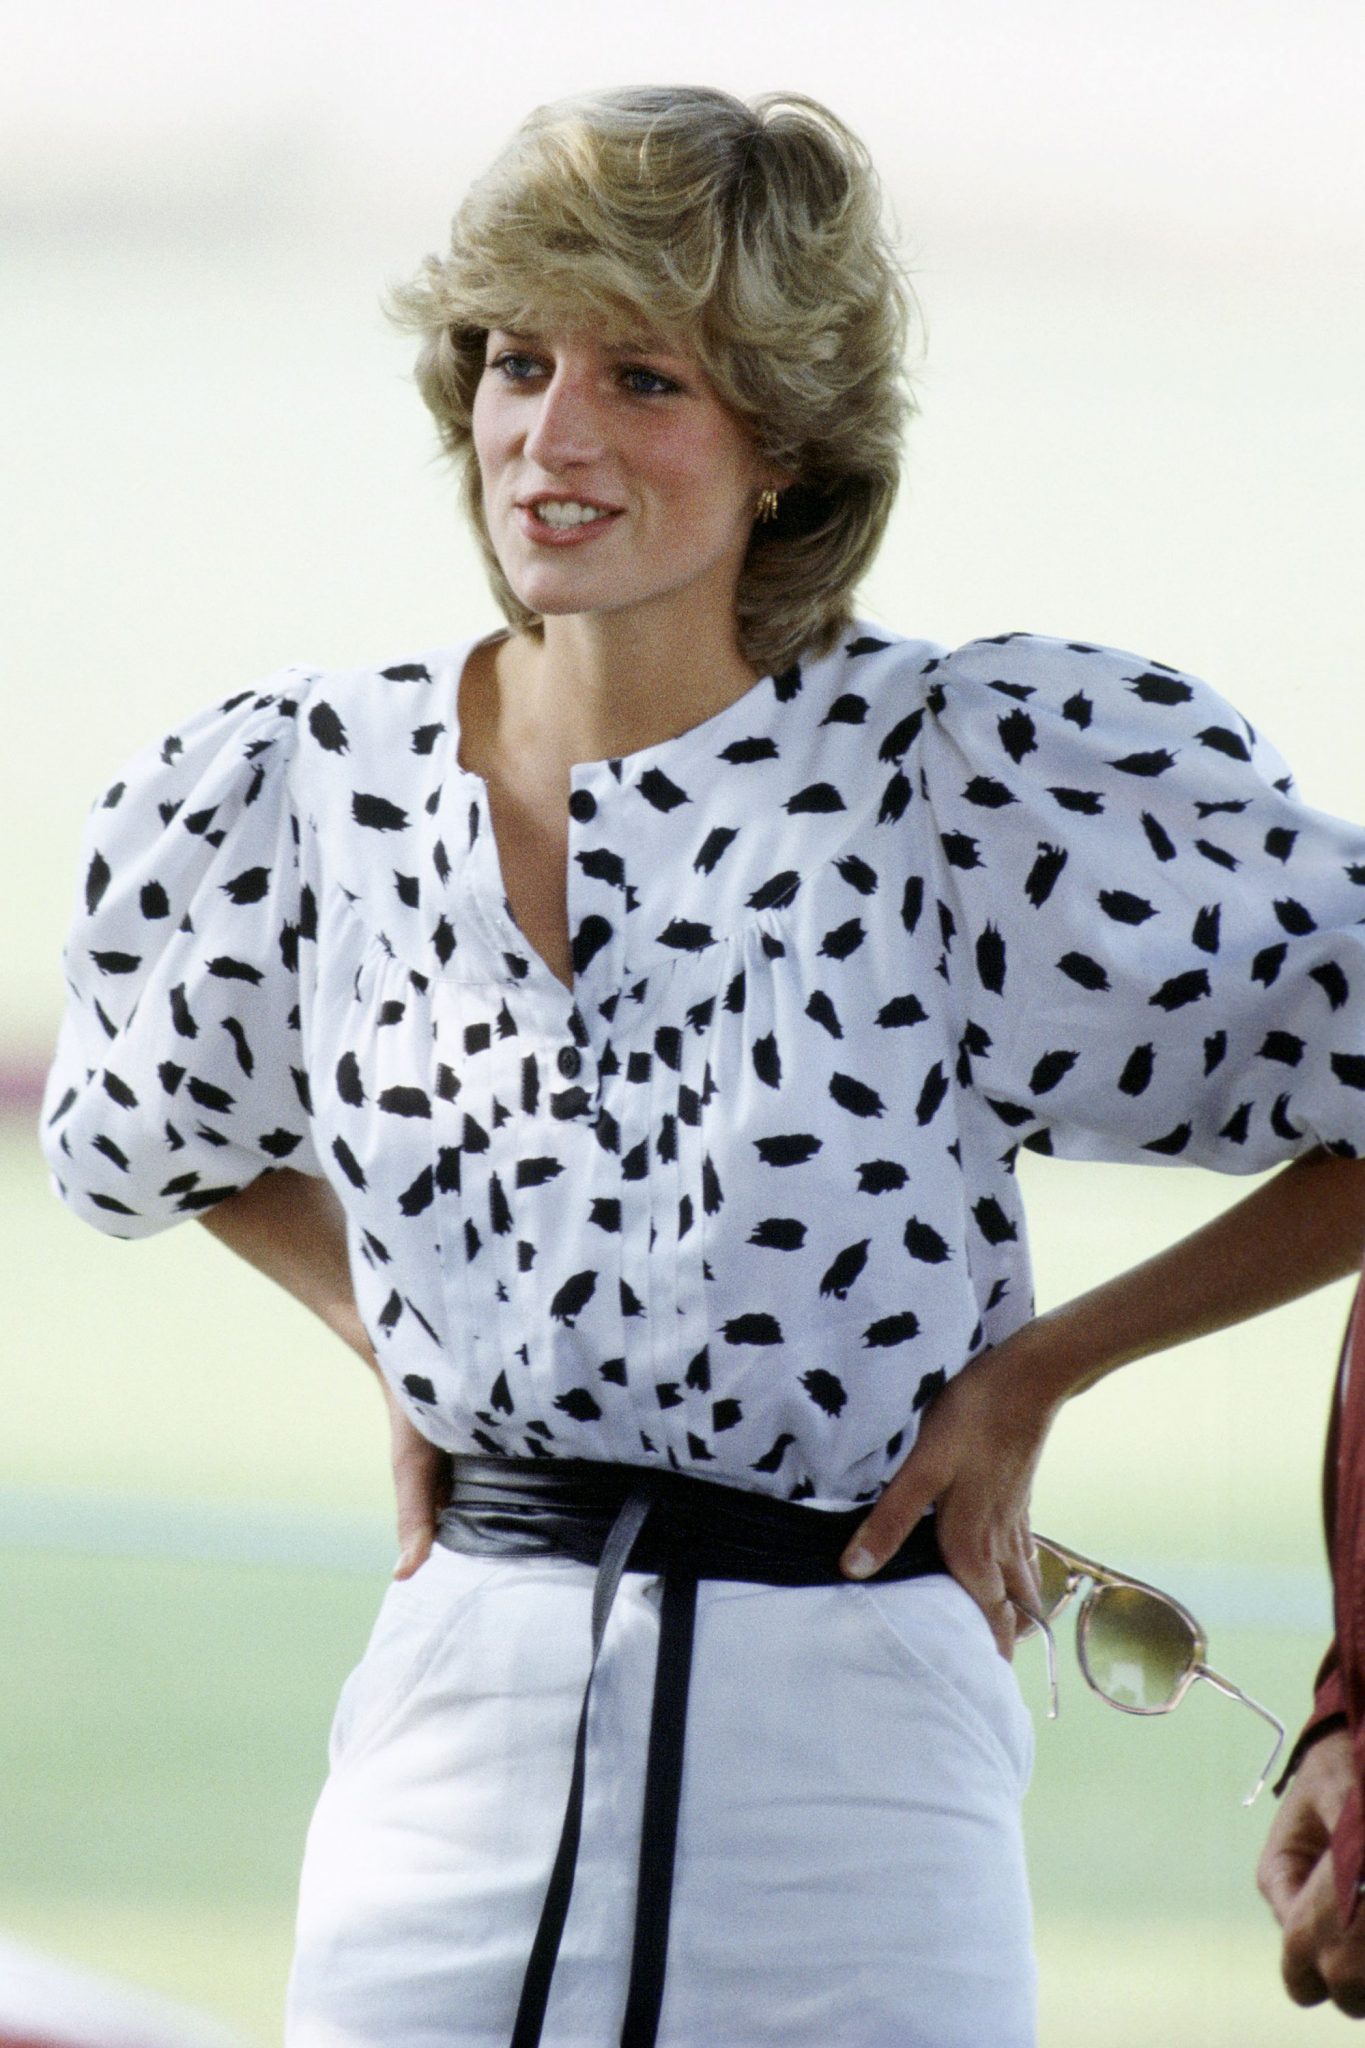 21 years later, fashion is still obsessed with princess diana